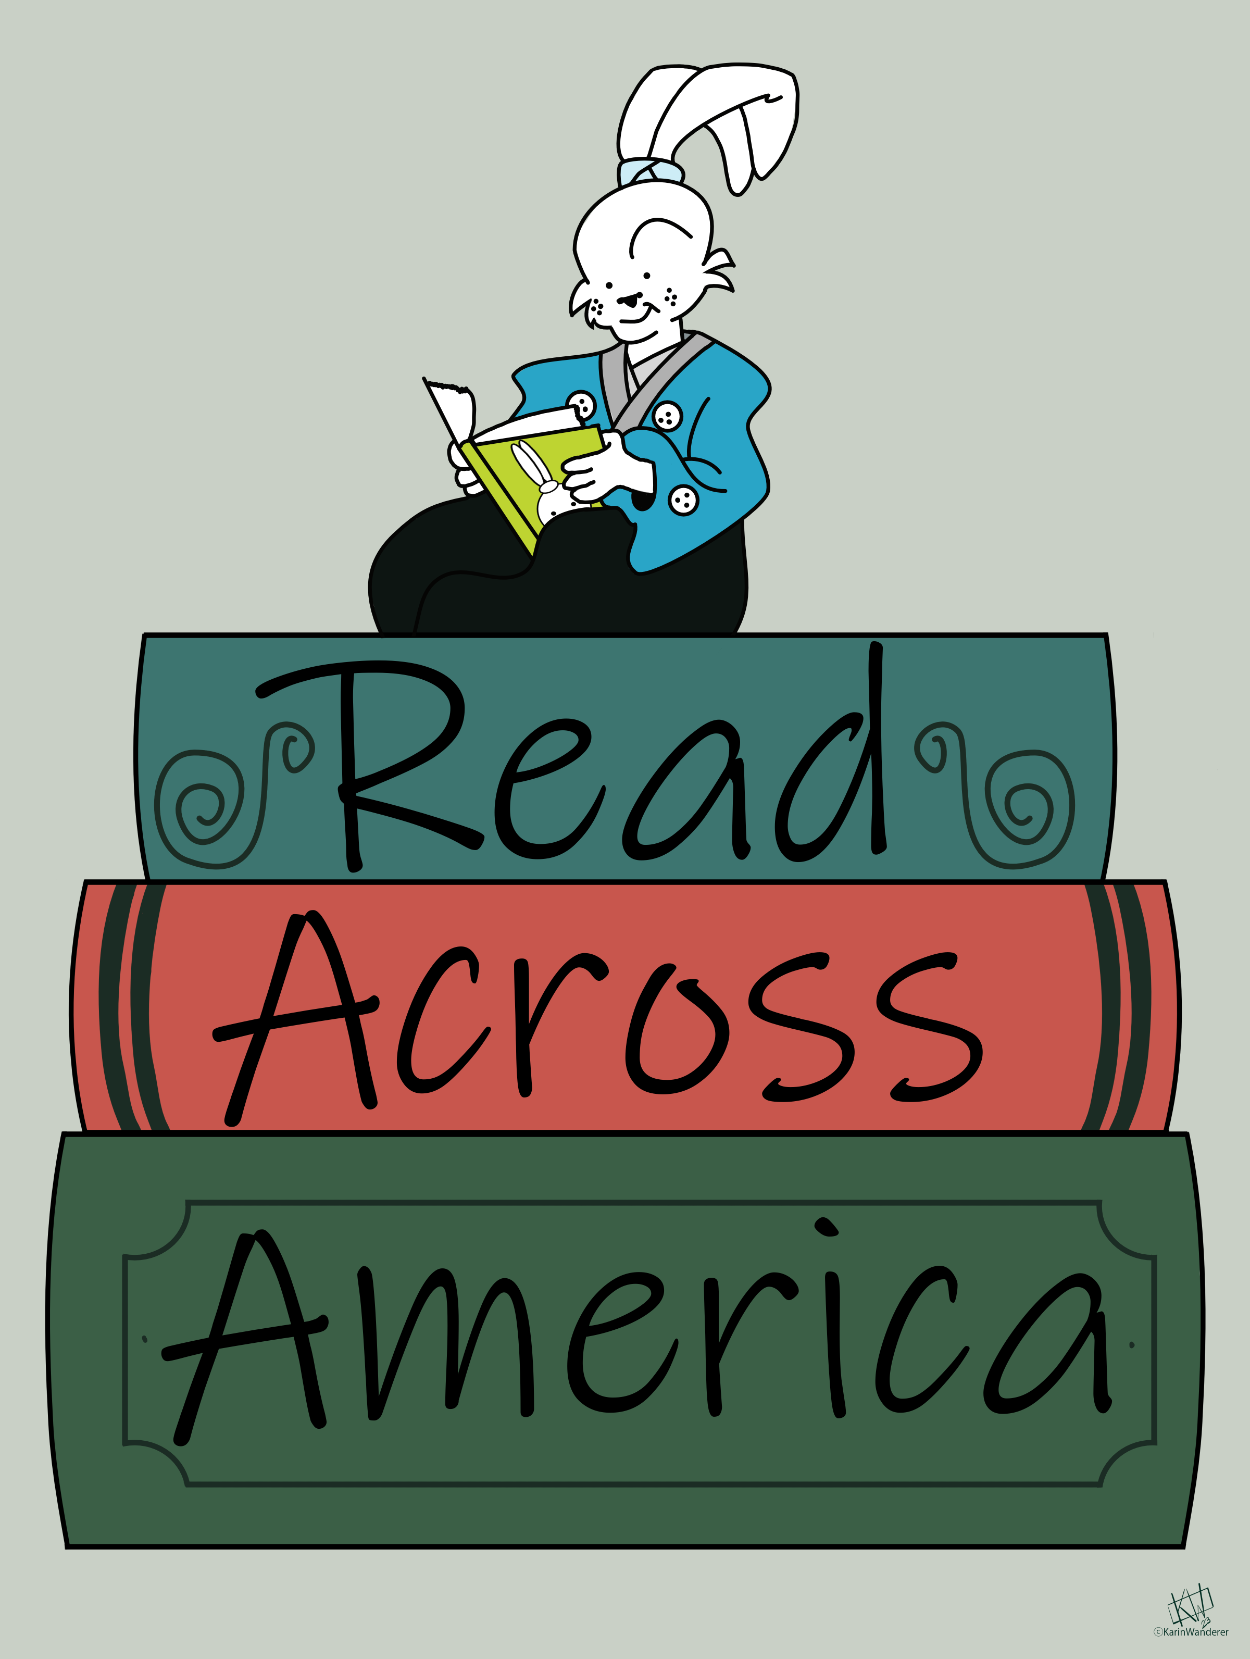 Miyamoto Usagi happily reads atop a stack of books. The book spines say “Read Across America